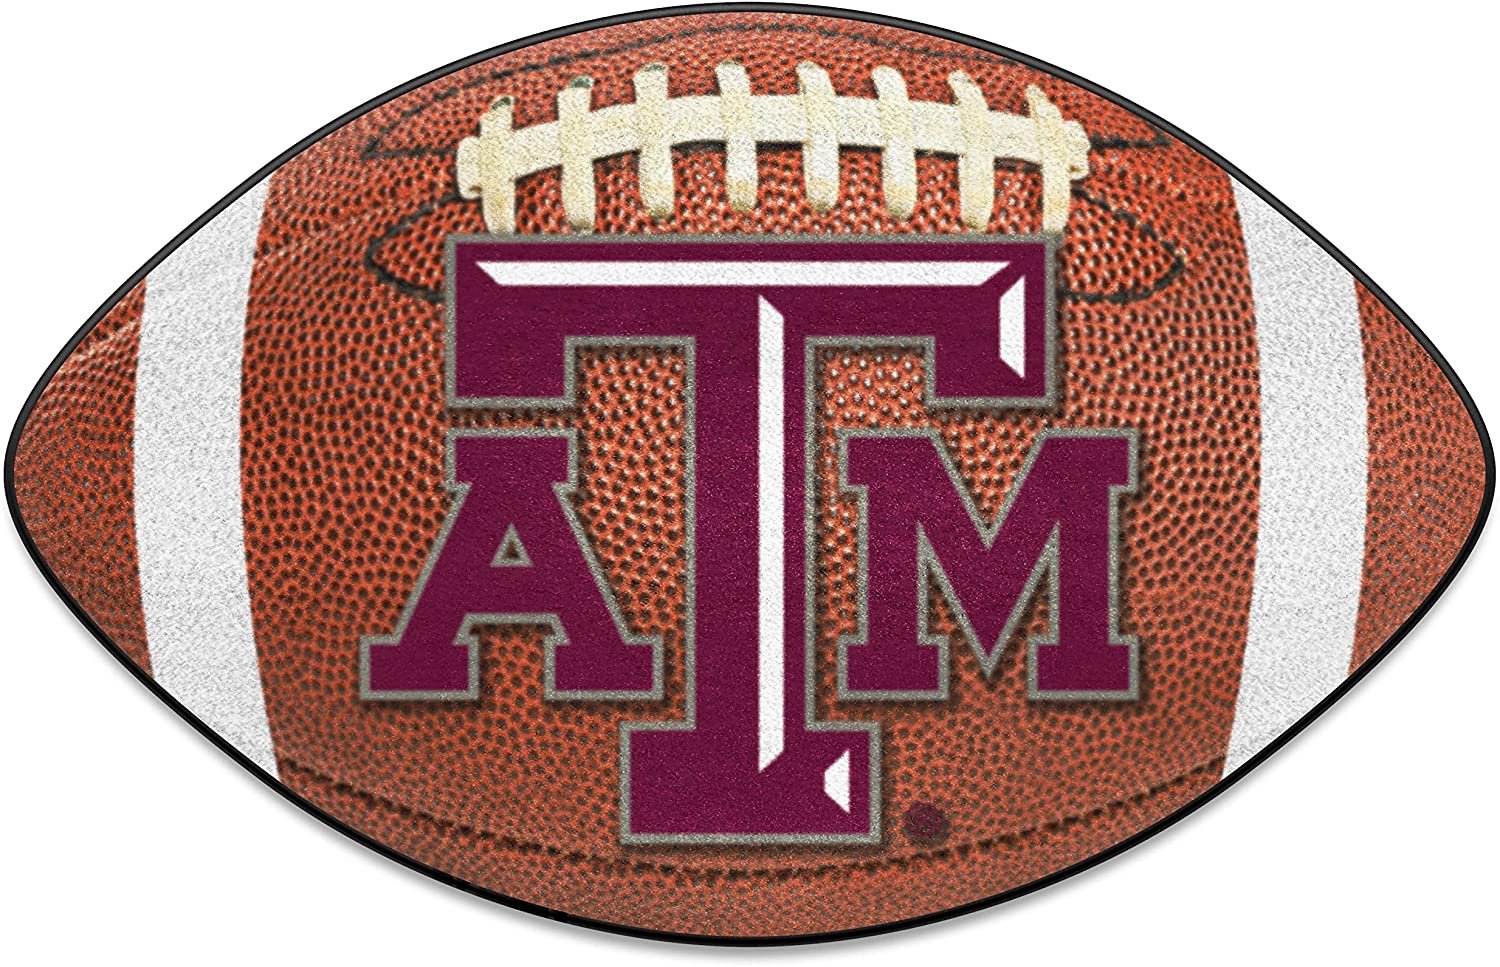 University of Texas A&M Aggies Floor Mat Area Rug, 20x32 Inch, Non-Skid Backing, Football Design